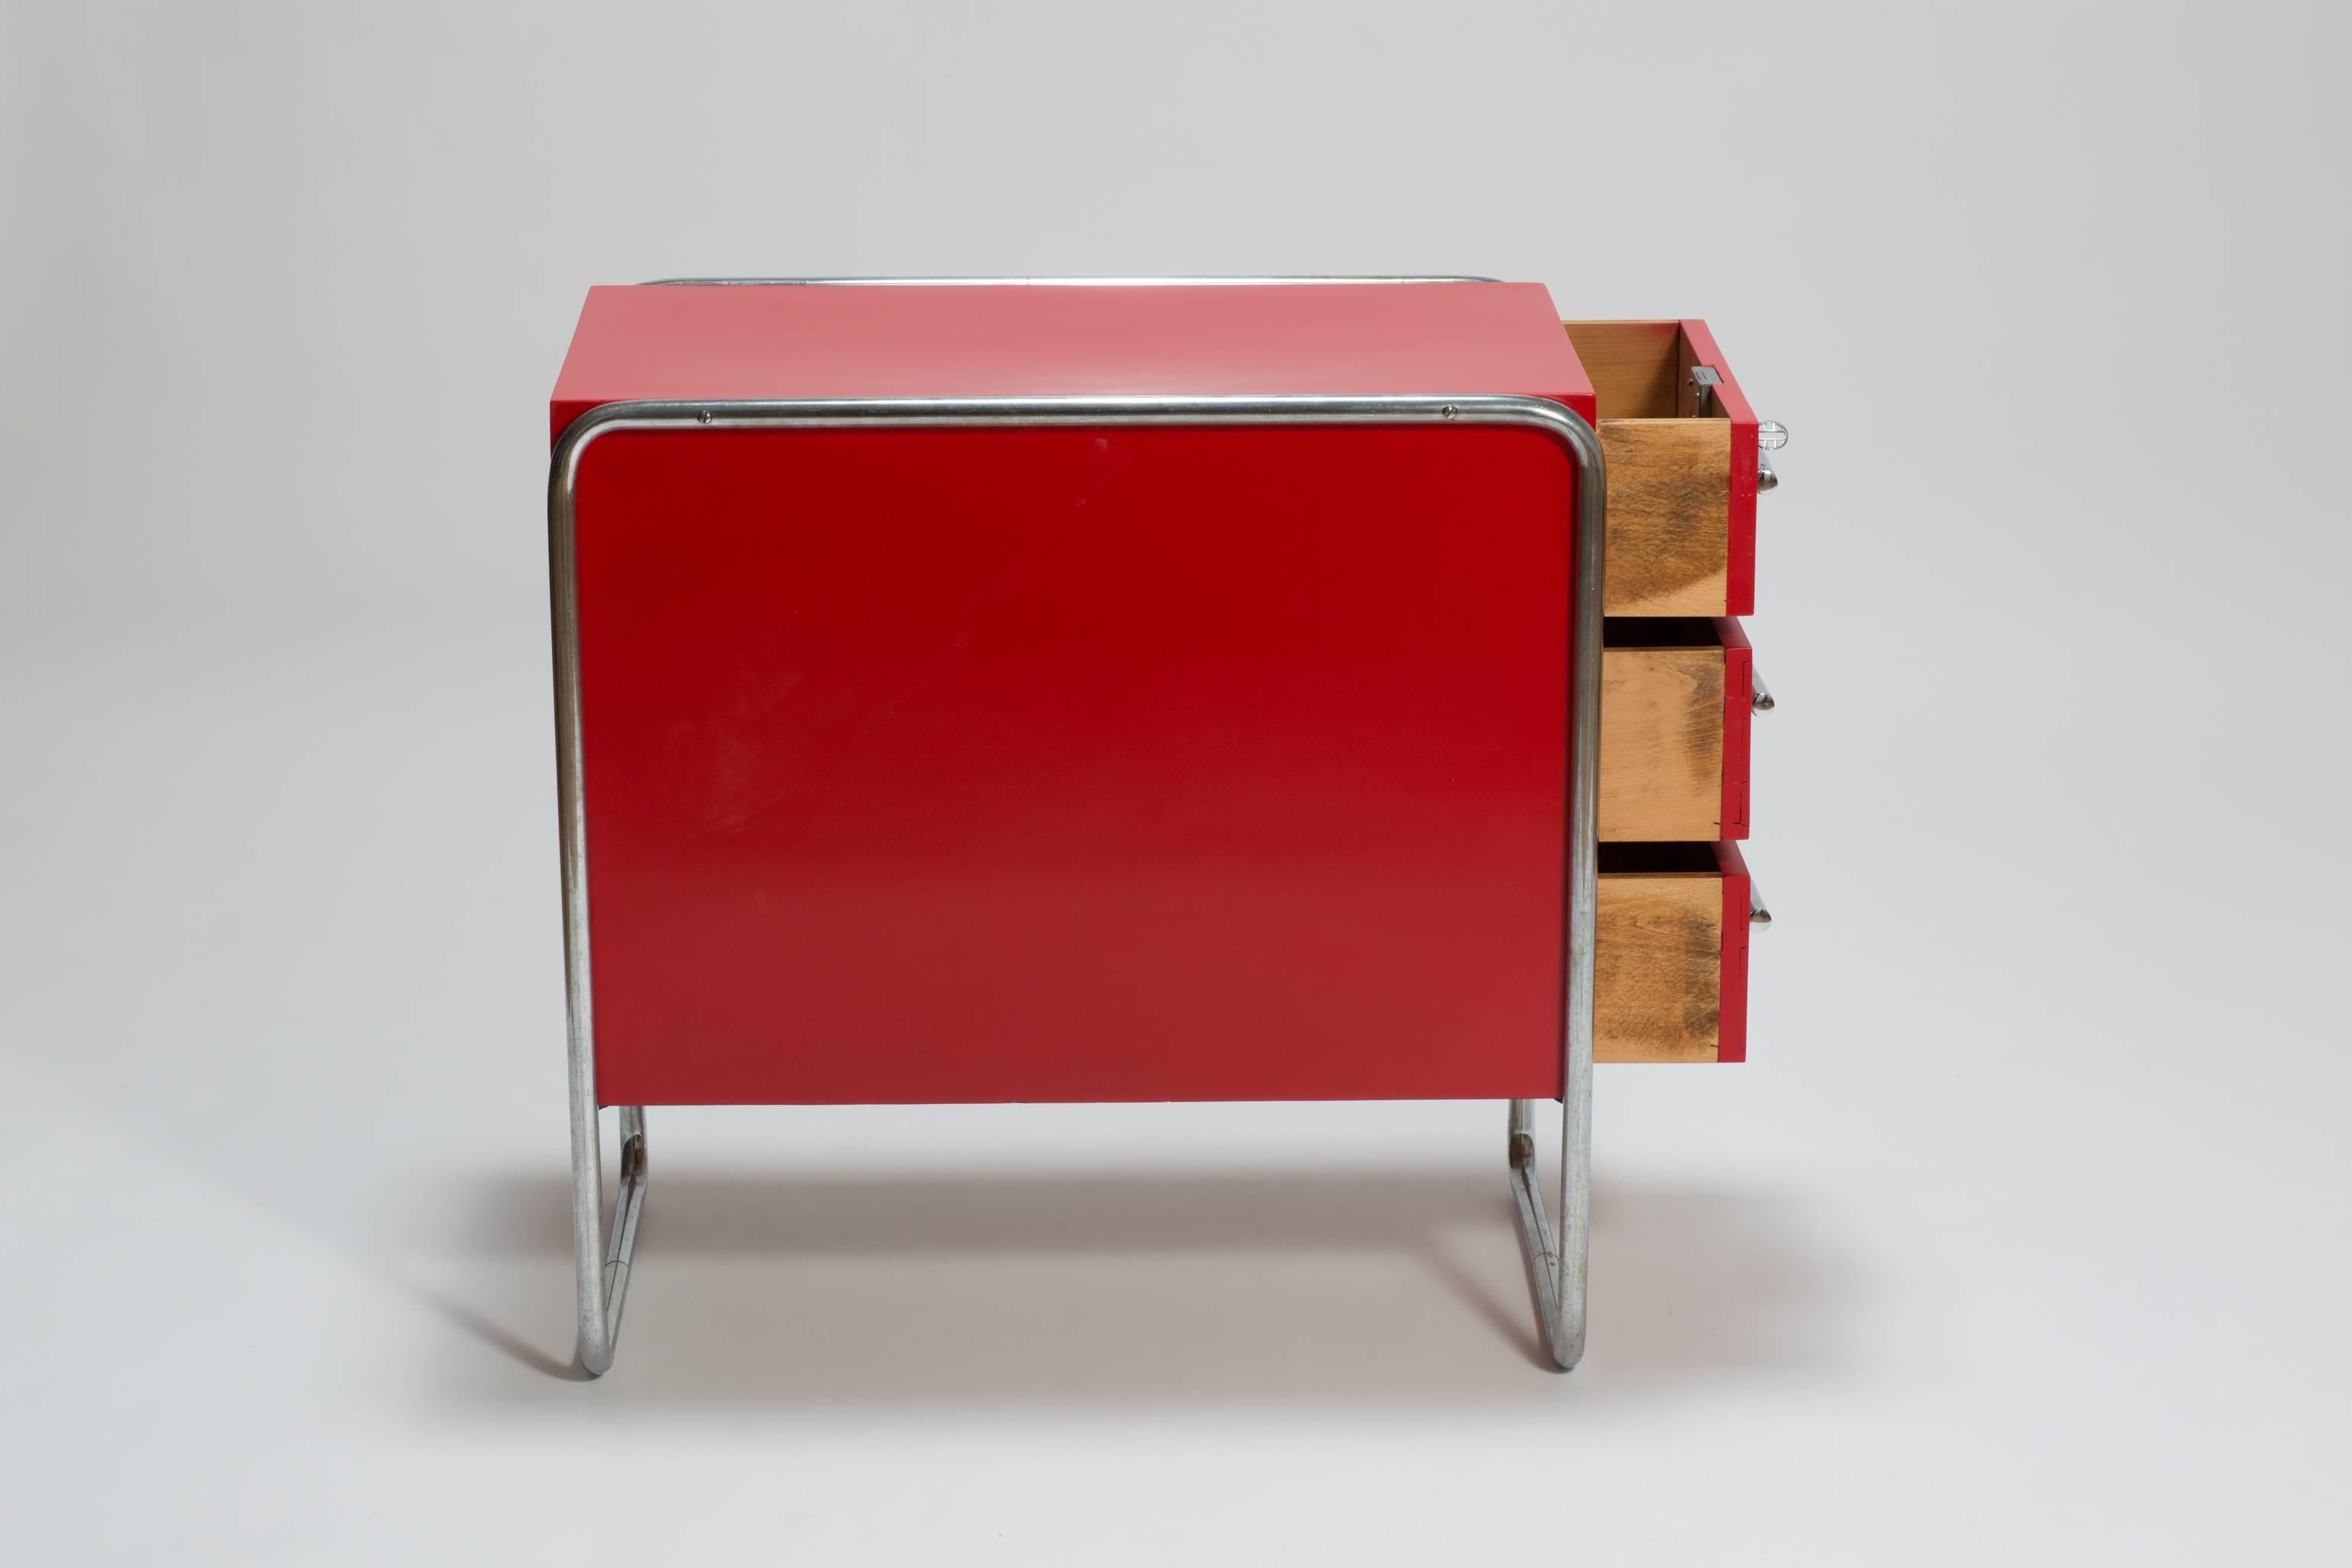 Galvanized Red Midcentury Design Bauhaus Writing Desk Container by Marcel Breuer, 1930 For Sale